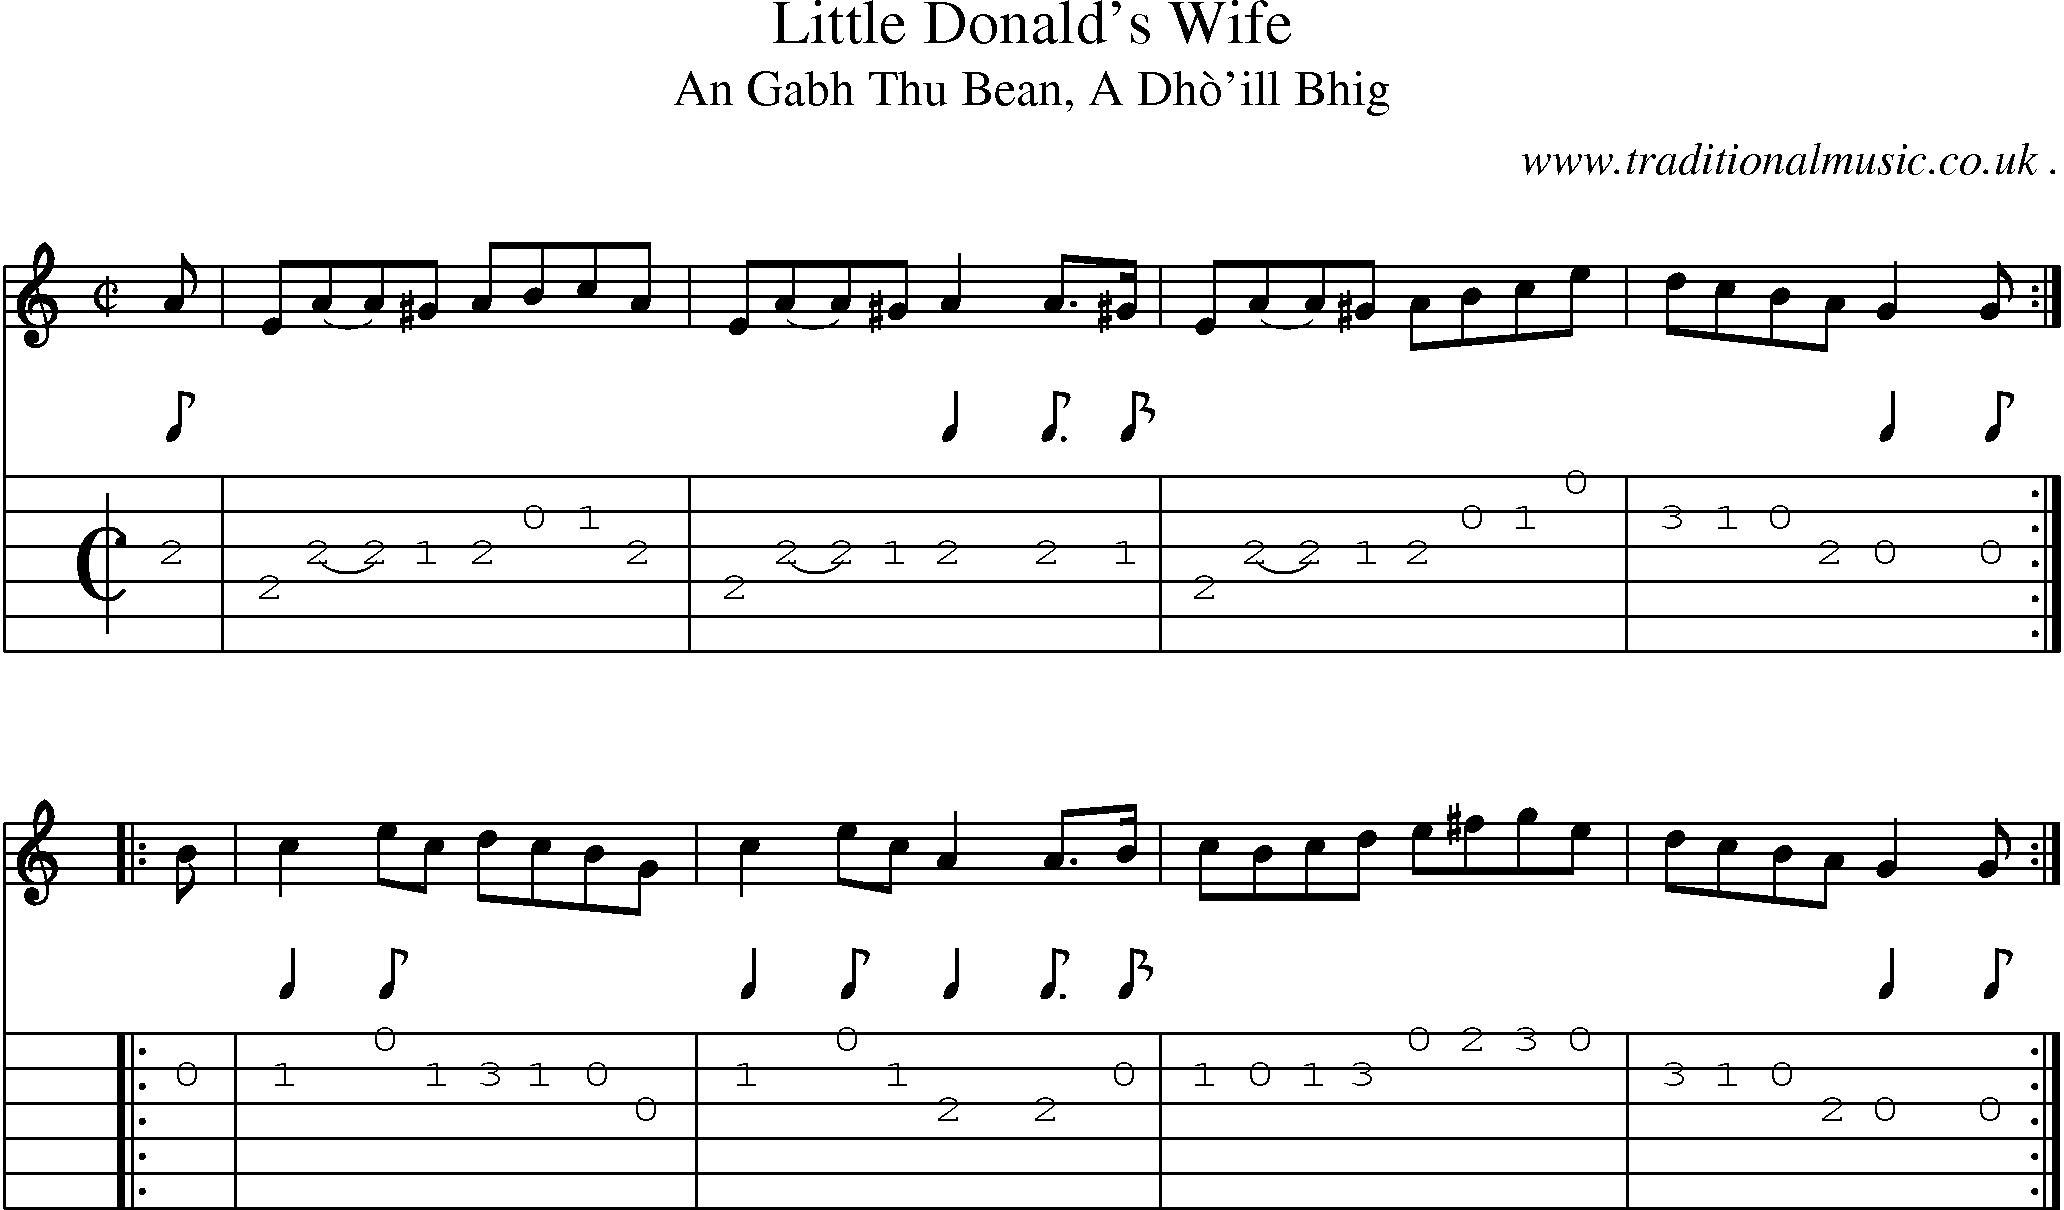 Sheet-music  score, Chords and Guitar Tabs for Little Donalds Wife